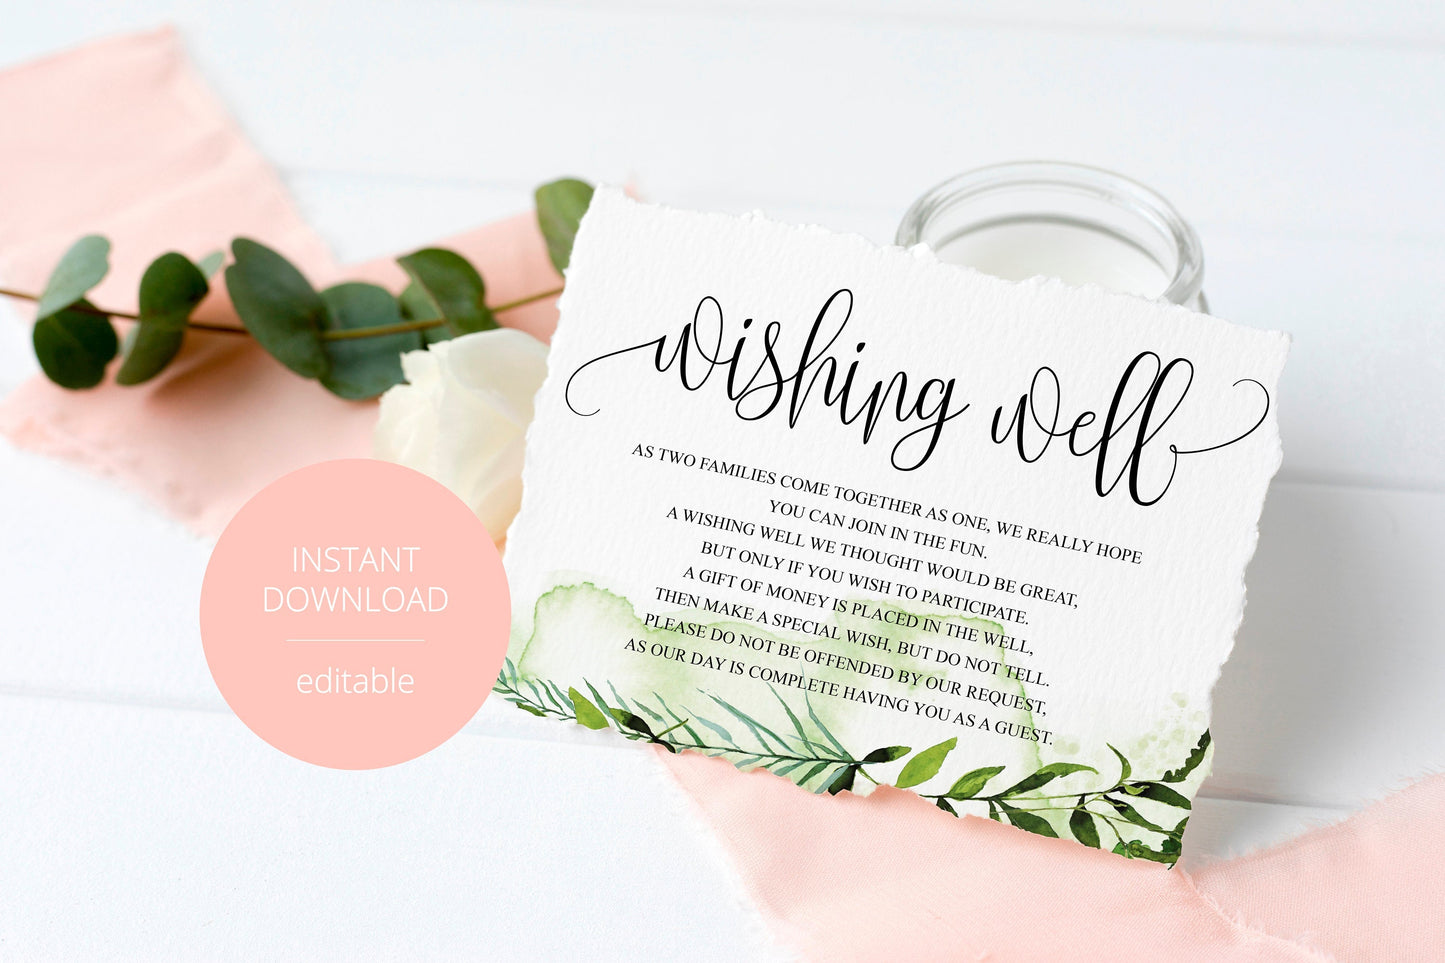 Simple Wedding Wishing Well Card Template,Instant Download, Editable Wishing, Wishing well Cards Insert, Greenery,Rustic  - Melissa TAGS | TY | INSERTS SAVVY PAPER CO